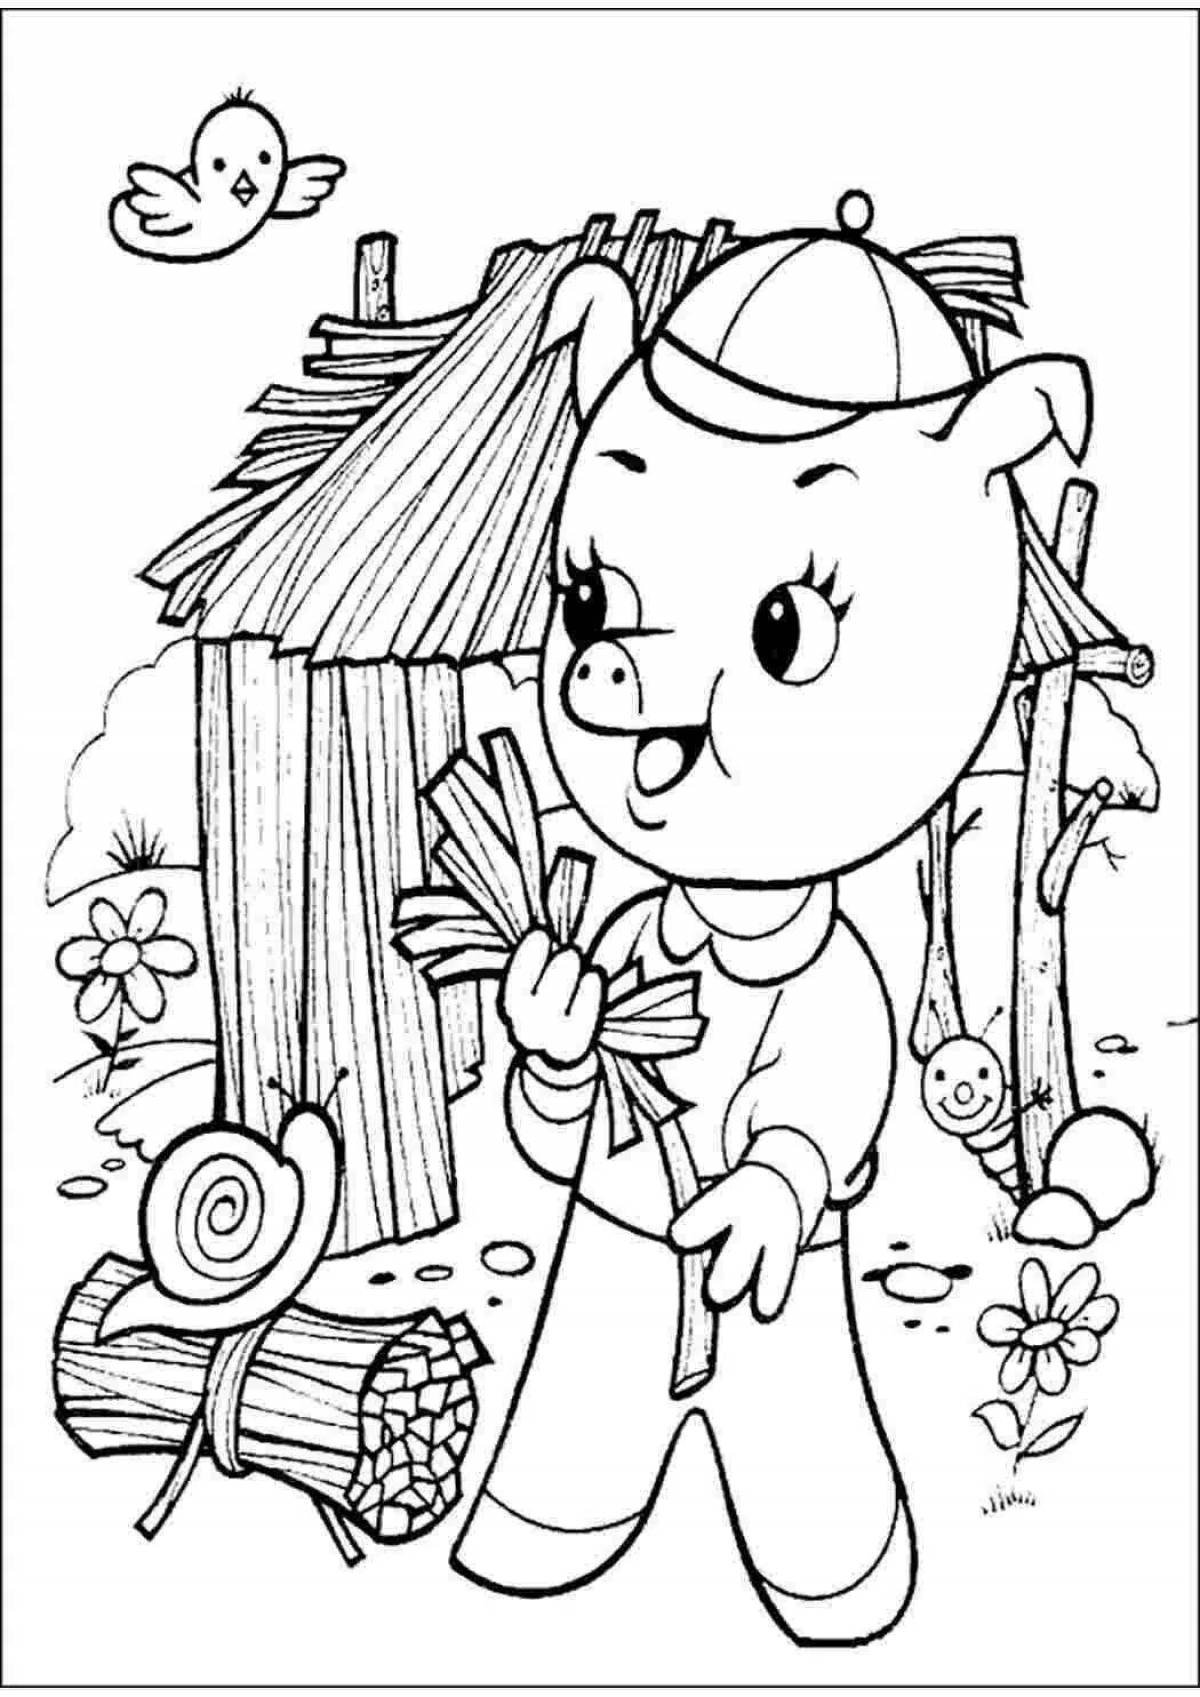 Adorable Three Little Pigs coloring book for 3-4 year olds